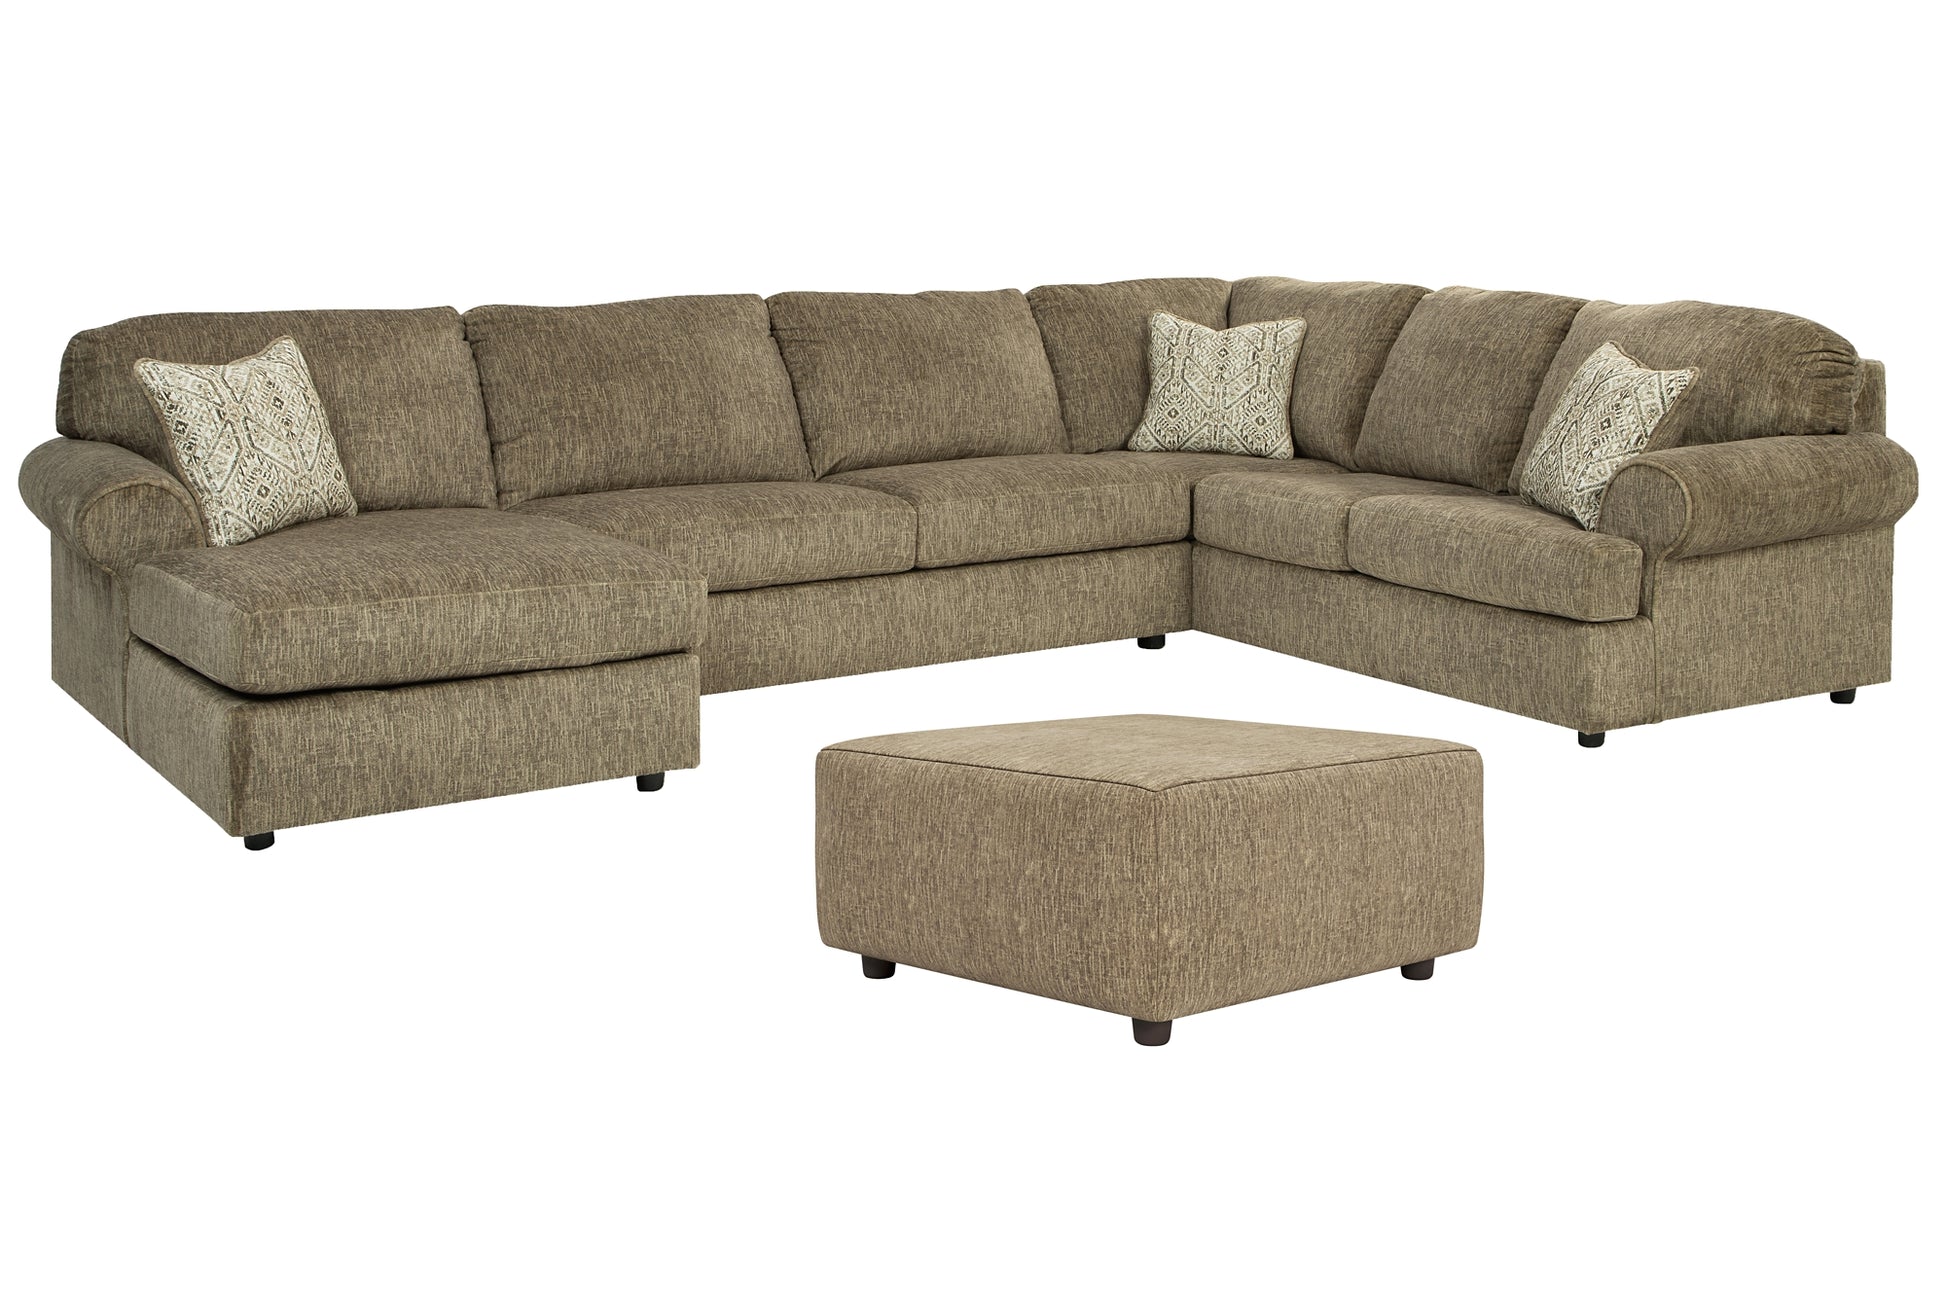 Hoylake 3-Piece Sectional with Ottoman Signature Design by Ashley®